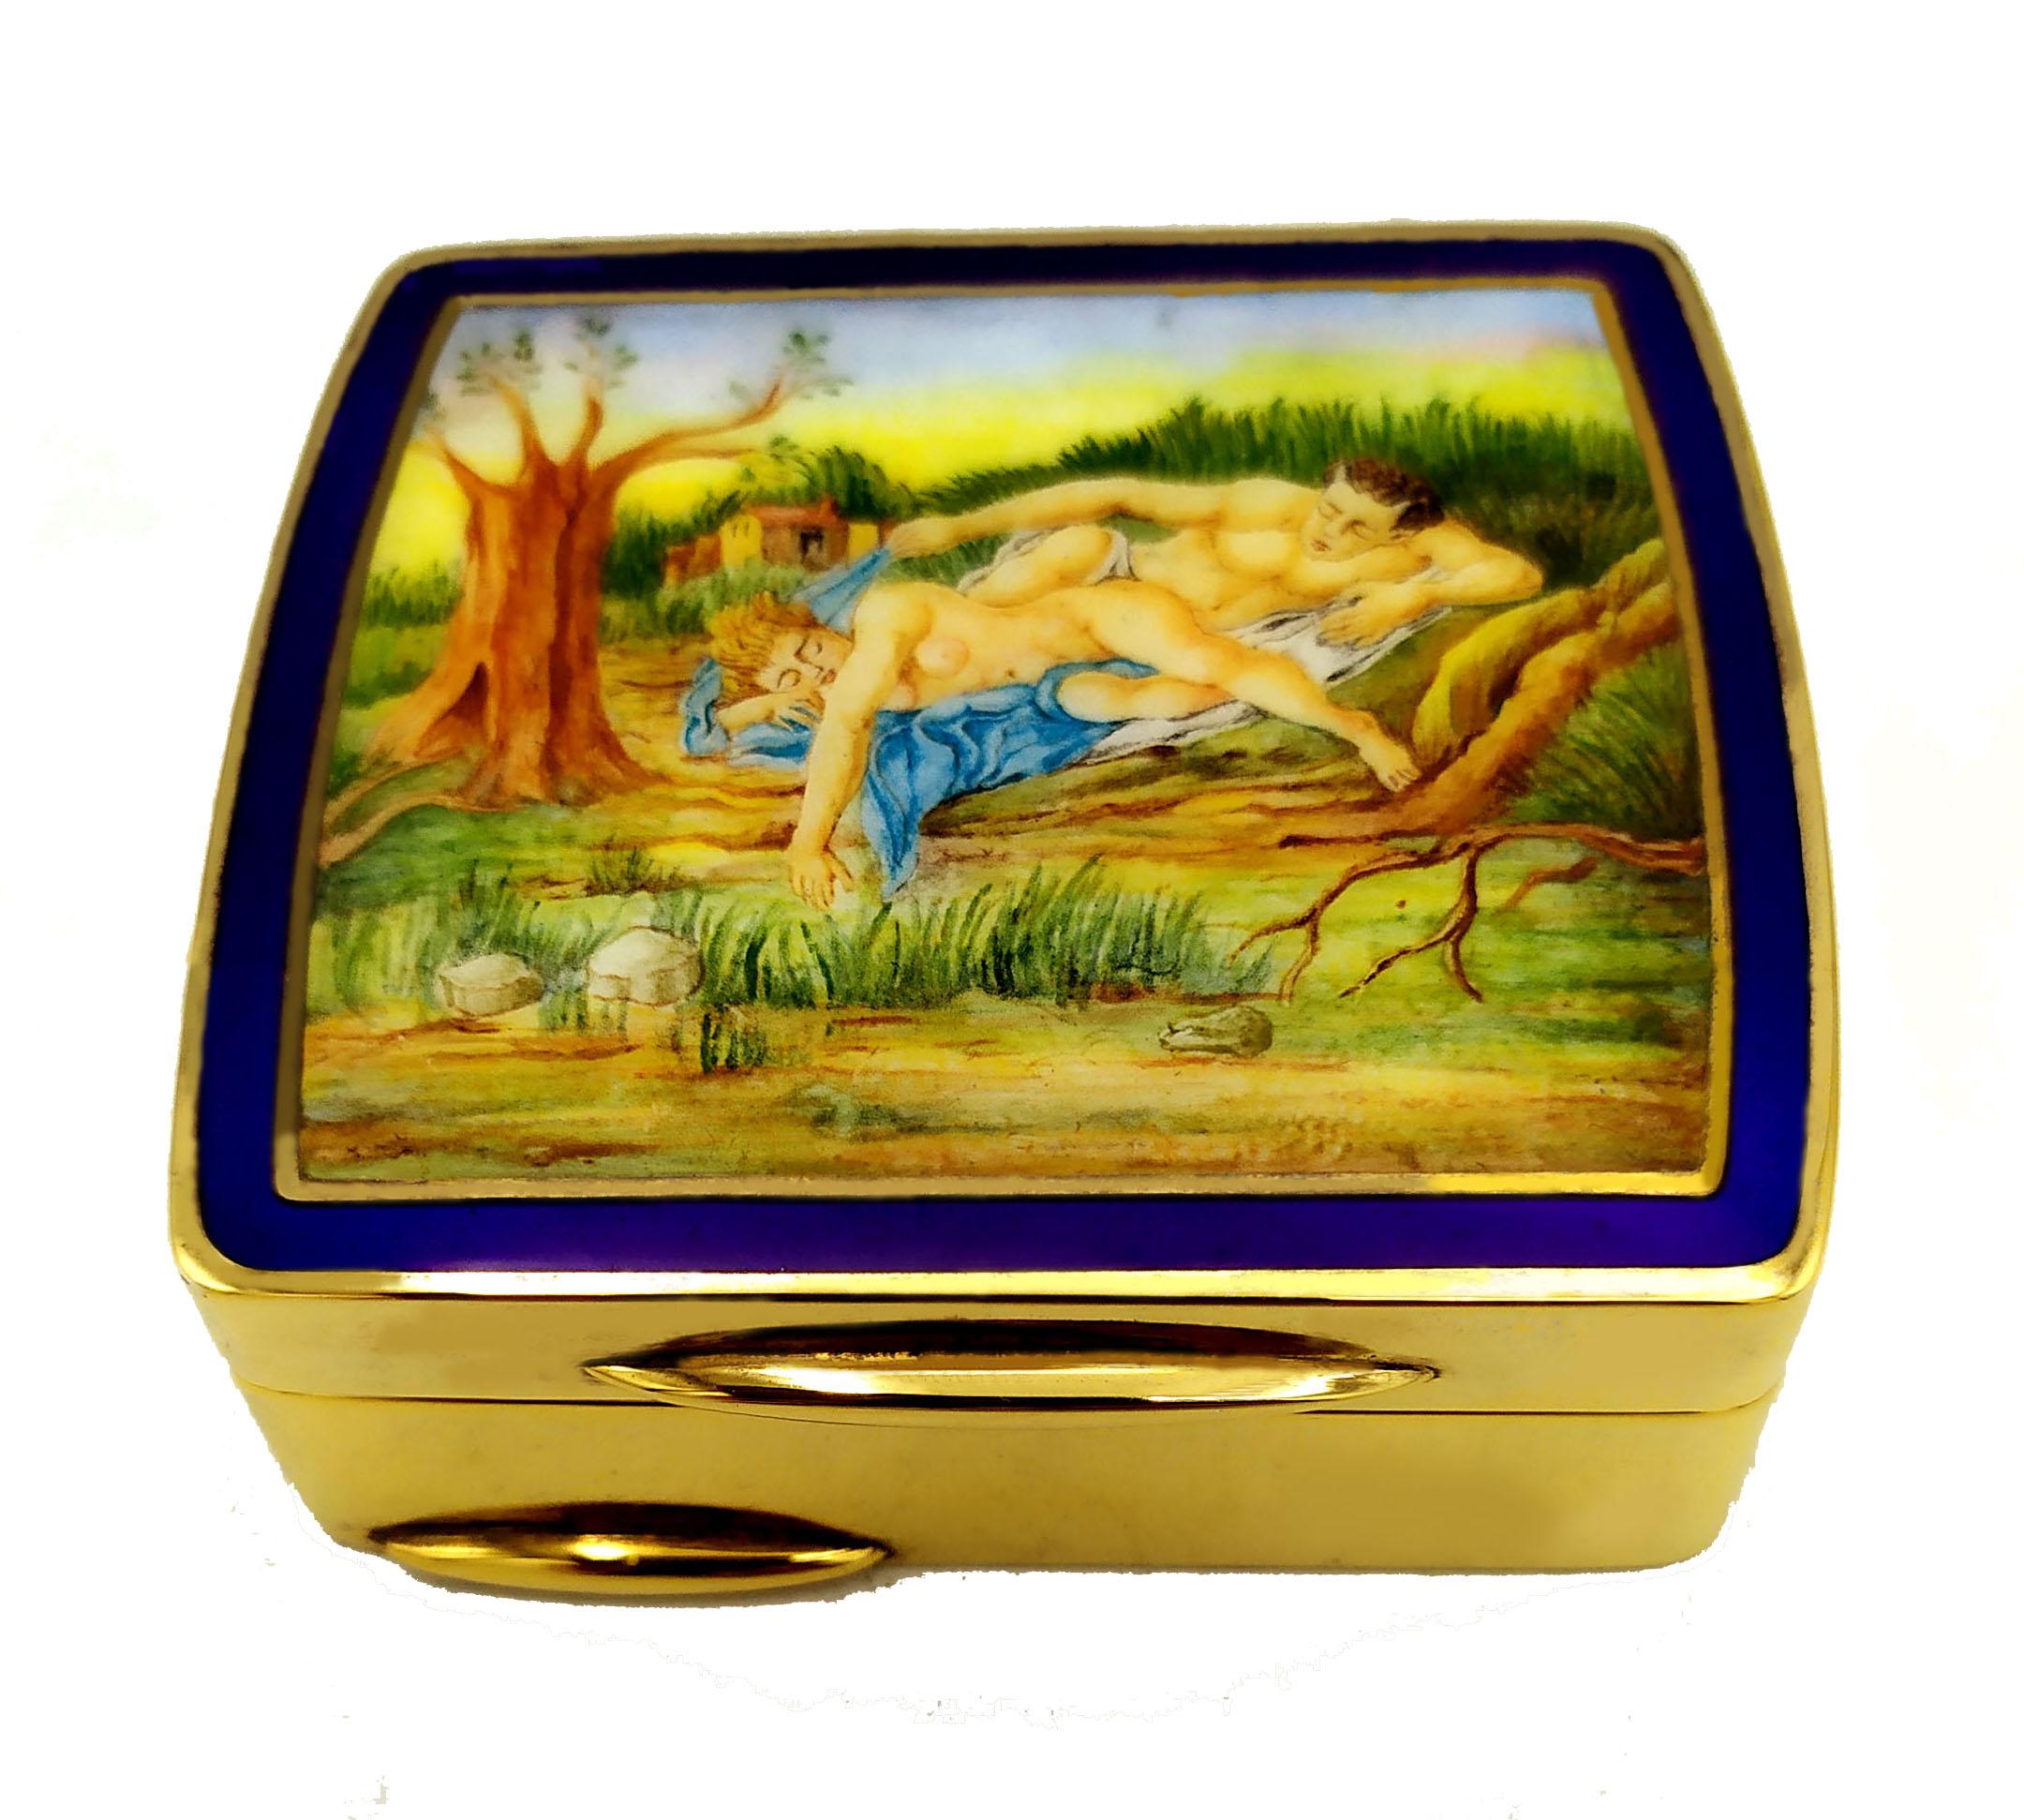 
Snuff Box Snuff Box with 2 slightly rounded sides is in 925/1000 sterling silver.
Snuff Box Snuff Box with 2 slightly rounded sides has fire-enamelled miniature hand-painted by the painter Renato Dainelli with an external blue line reproducing an